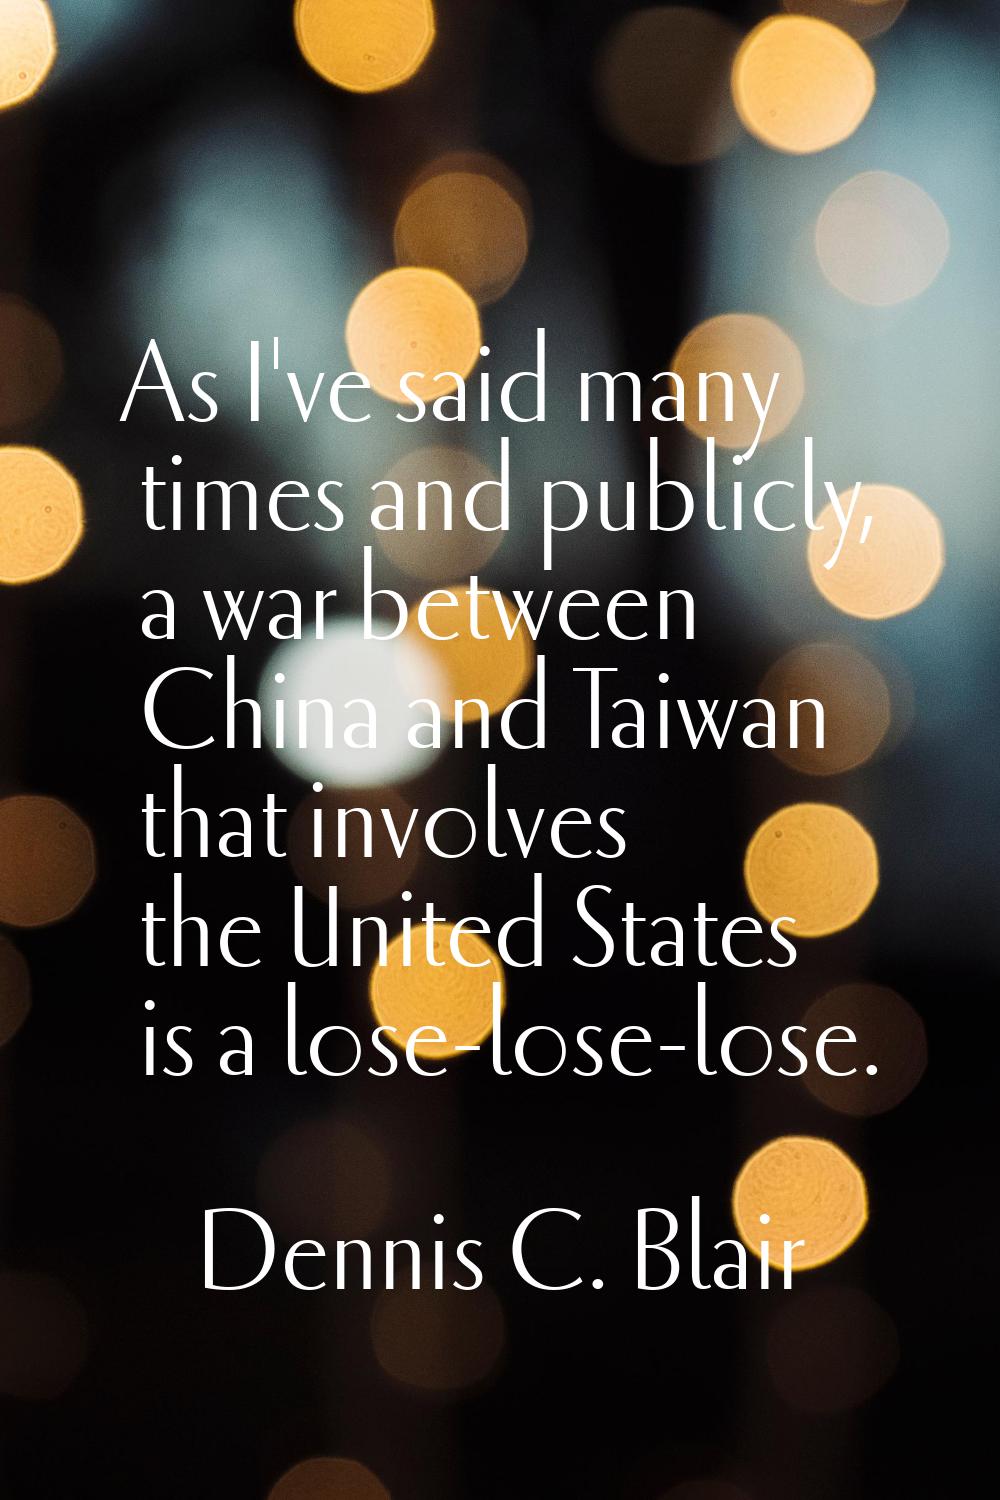 As I've said many times and publicly, a war between China and Taiwan that involves the United State